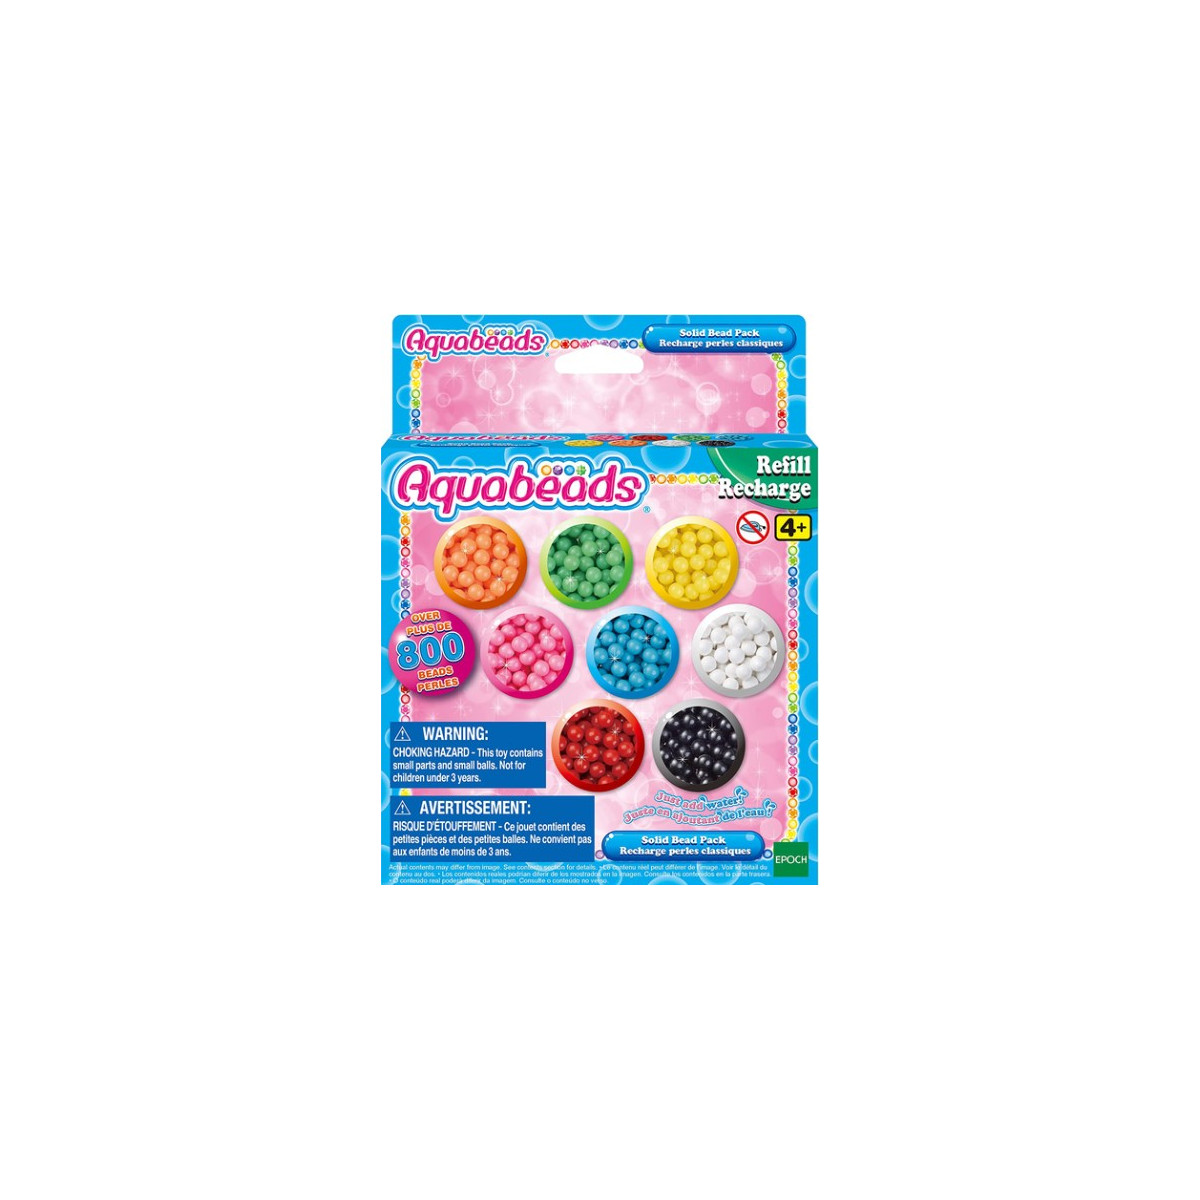 REFILL PASTEL SOLID BEAD PACK AQUABEADS Michigan